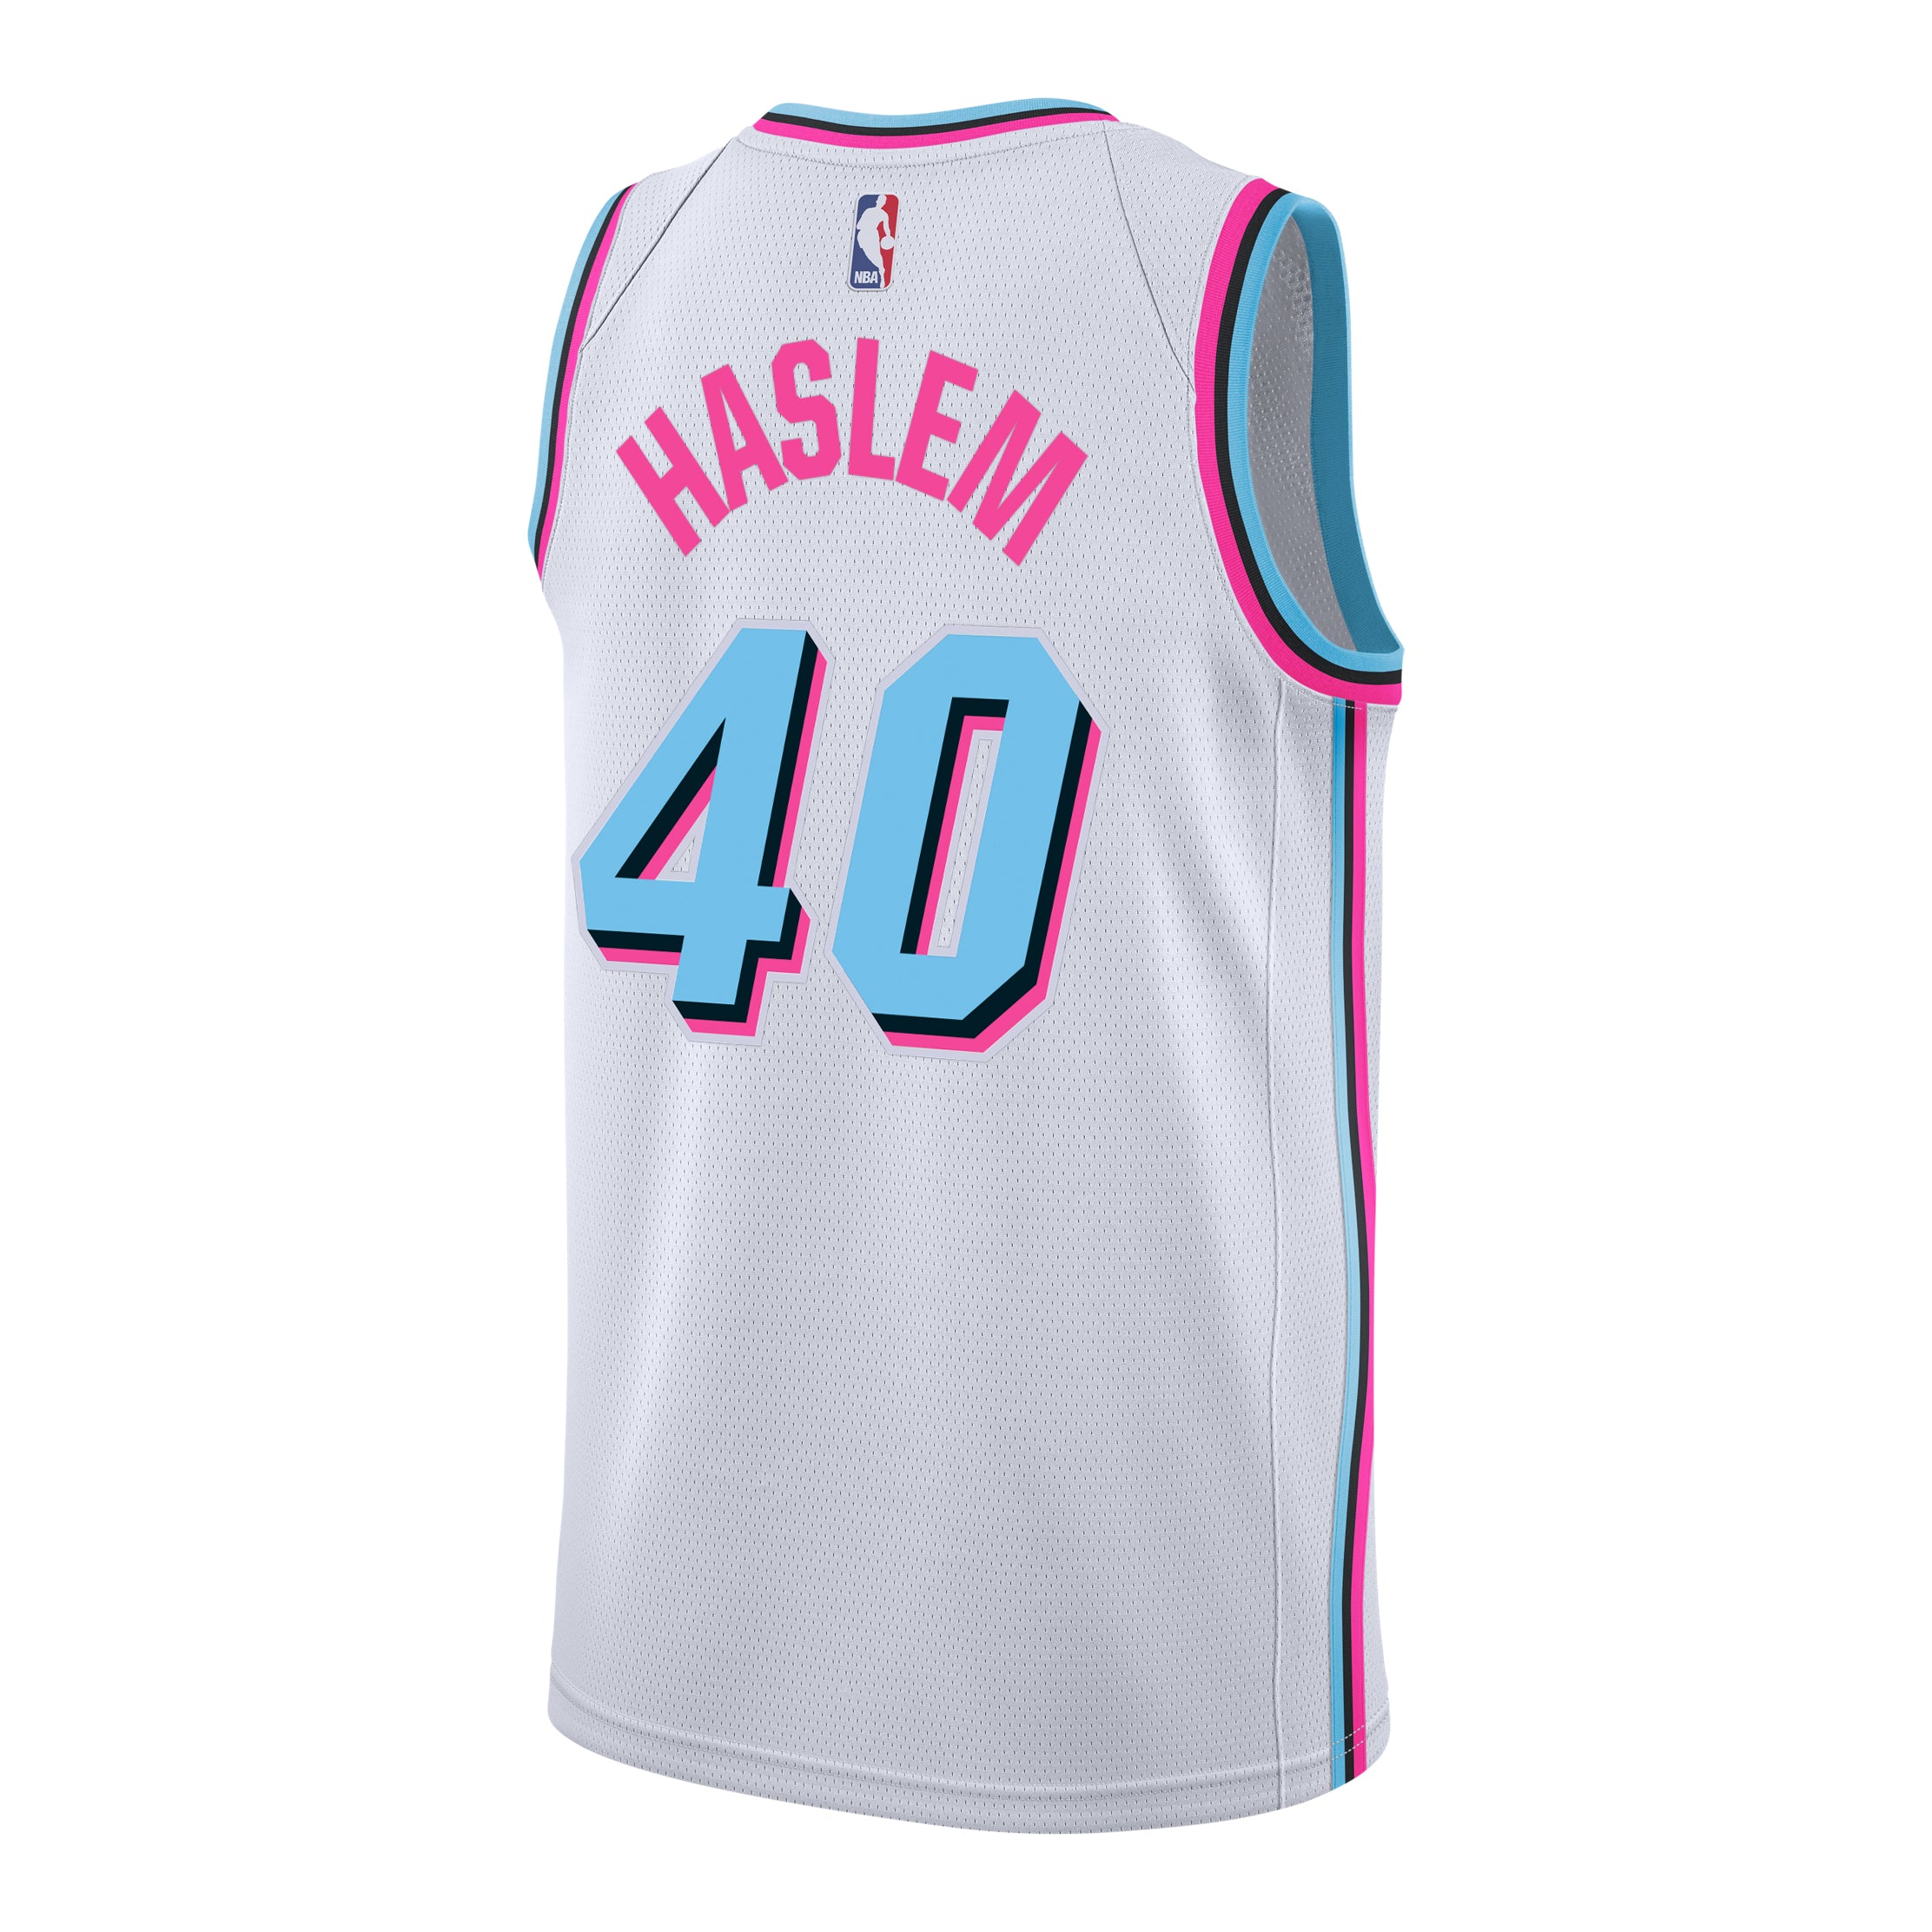 miami heat udonis haslem jersey